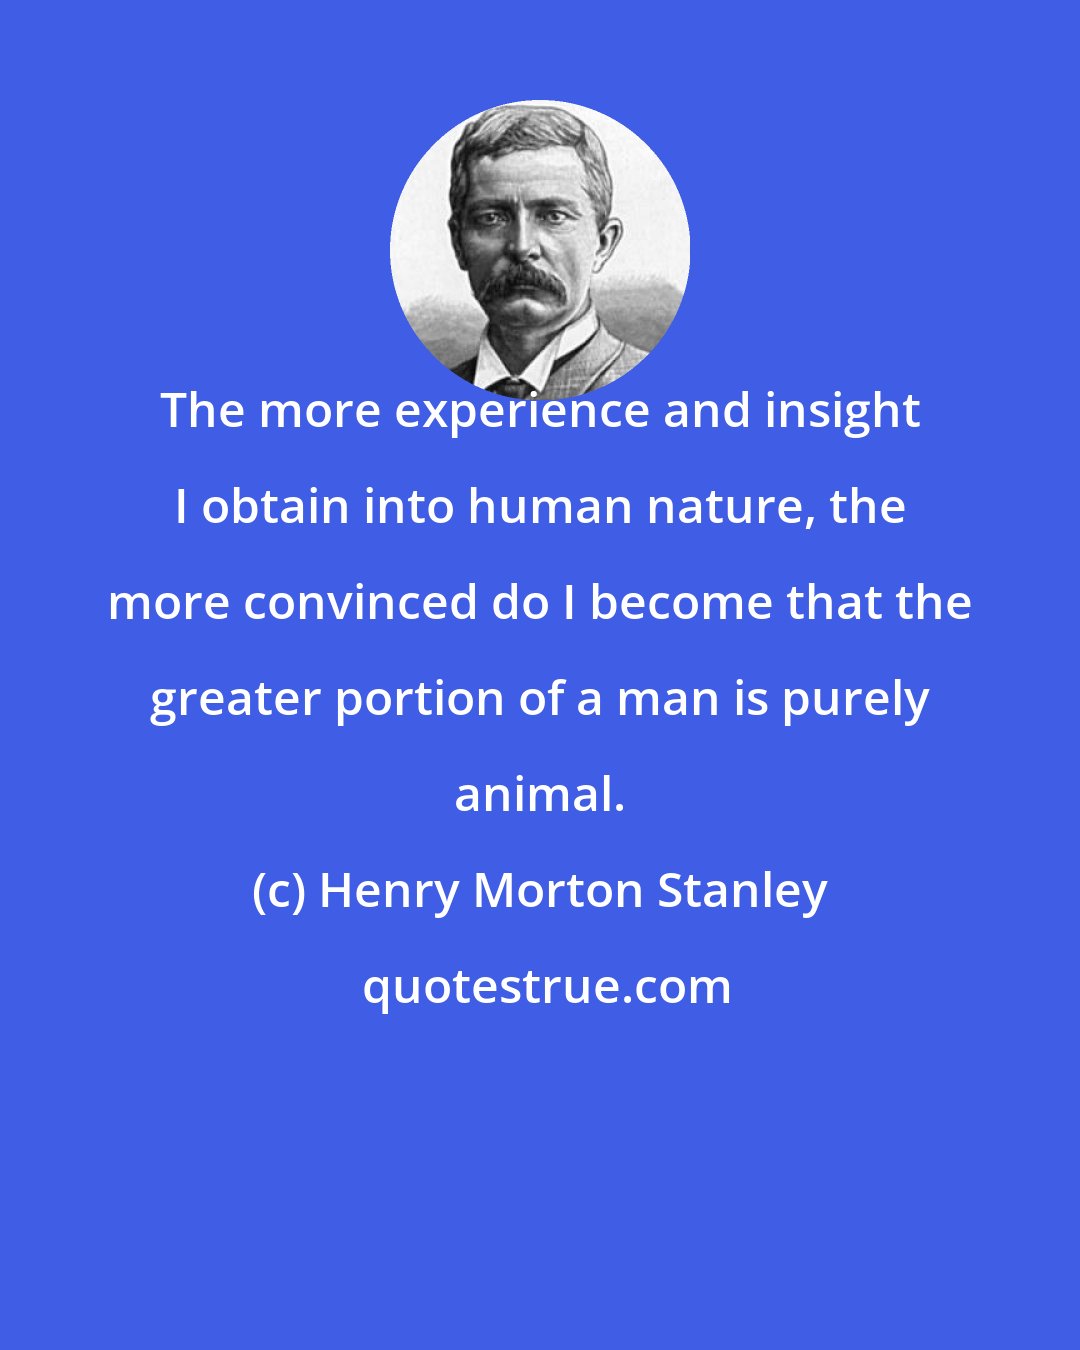 Henry Morton Stanley: The more experience and insight I obtain into human nature, the more convinced do I become that the greater portion of a man is purely animal.